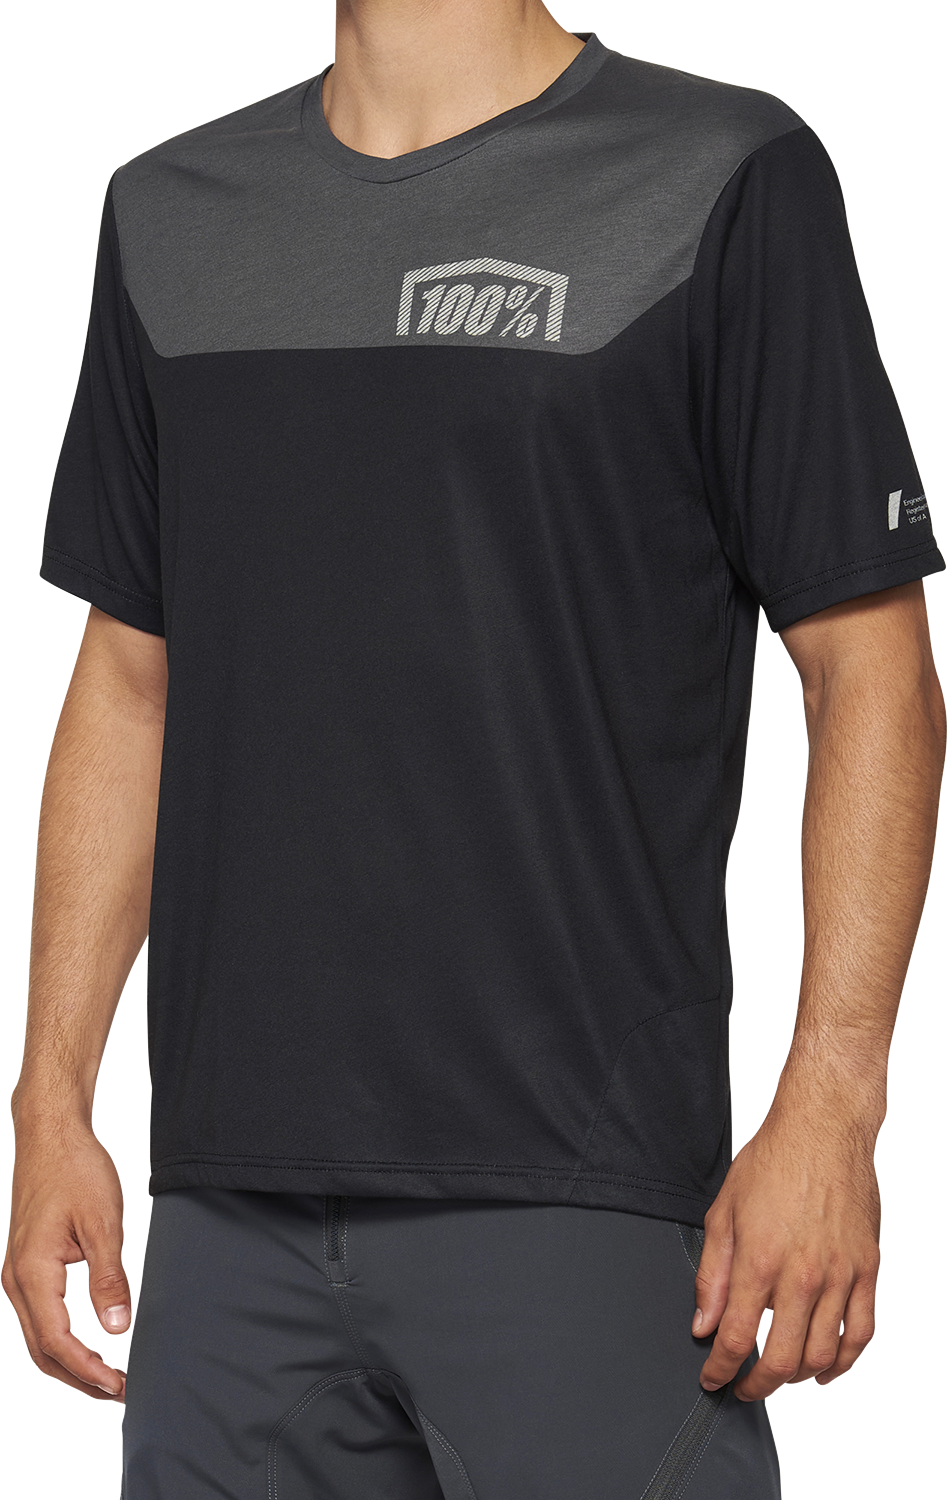 100% Airmatic Jersey - Short-Sleeve - Black/Charcoal - Large 40014-00002